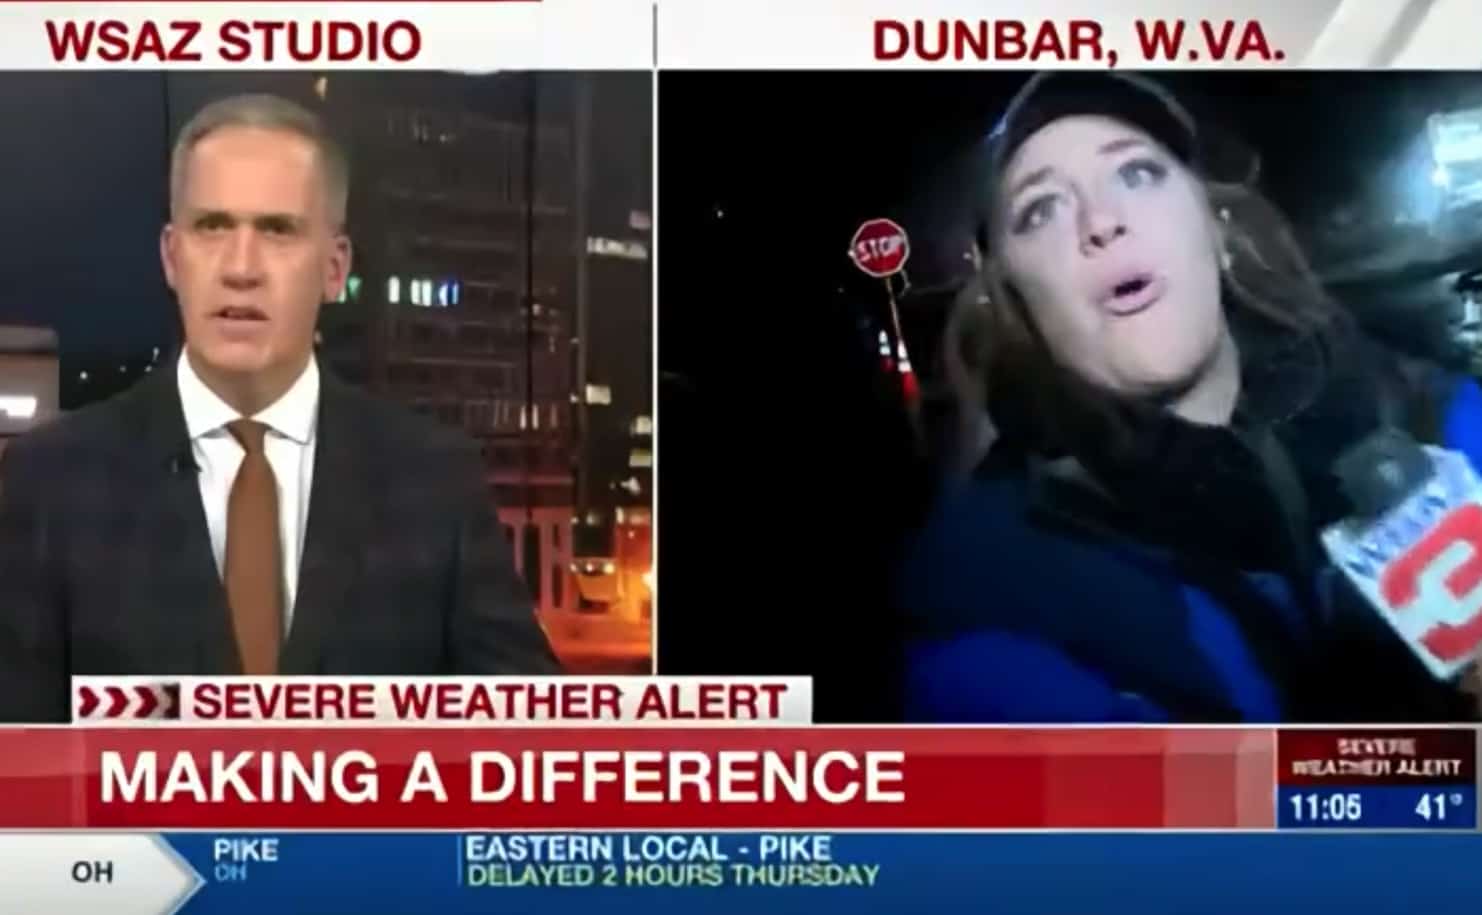 Reporter gets hit by a car on live TV – and continues the broadcast